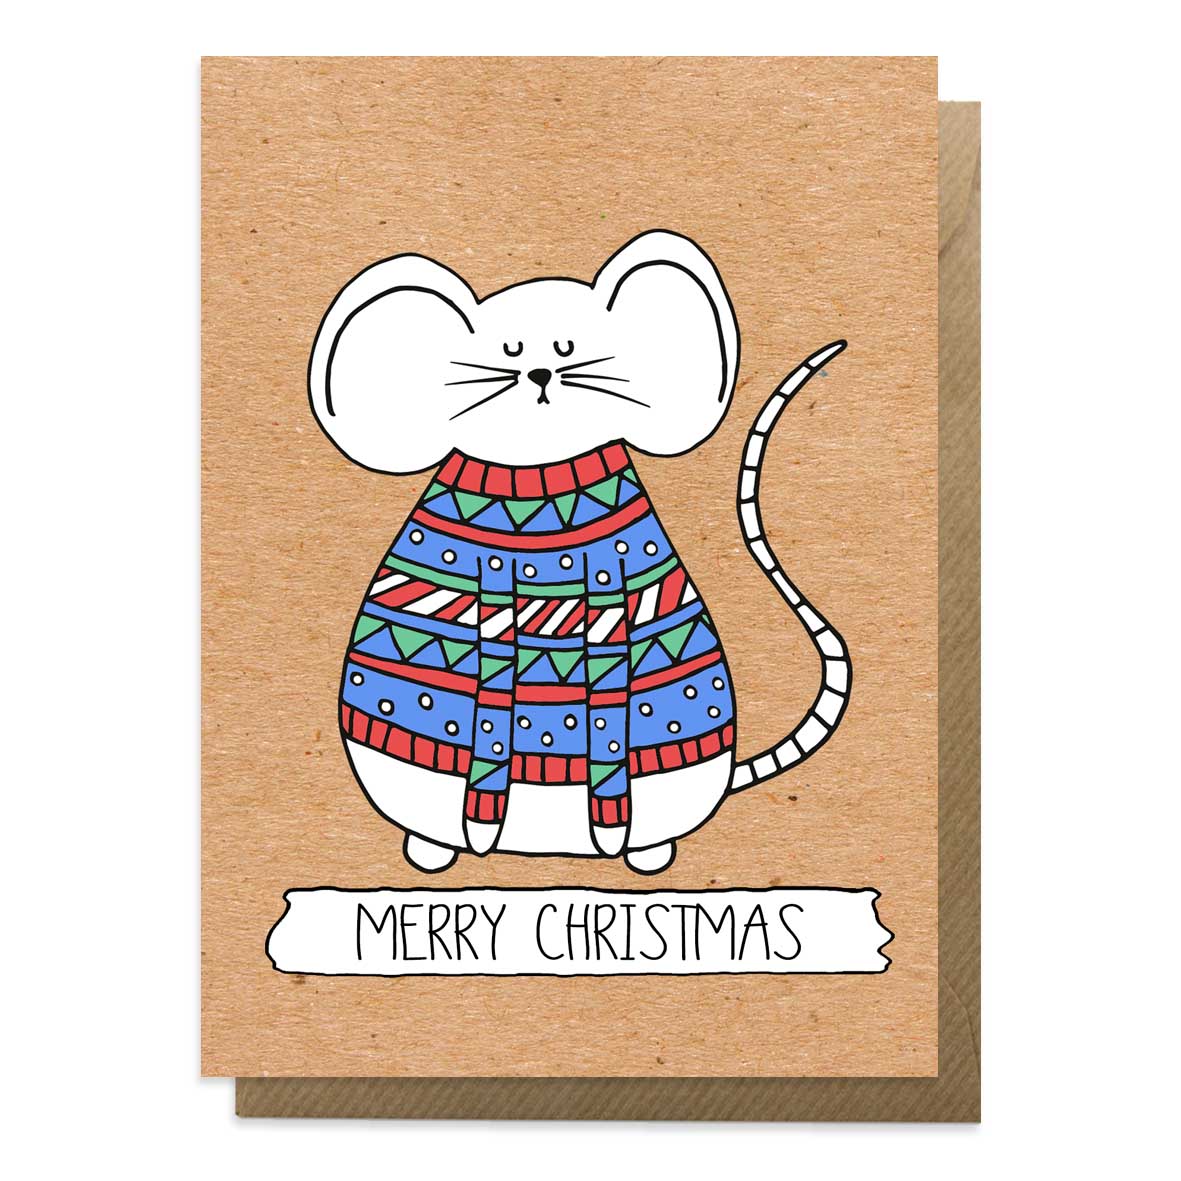 Christmas mouse card with an image of a mouse wearing a Christmas jumper